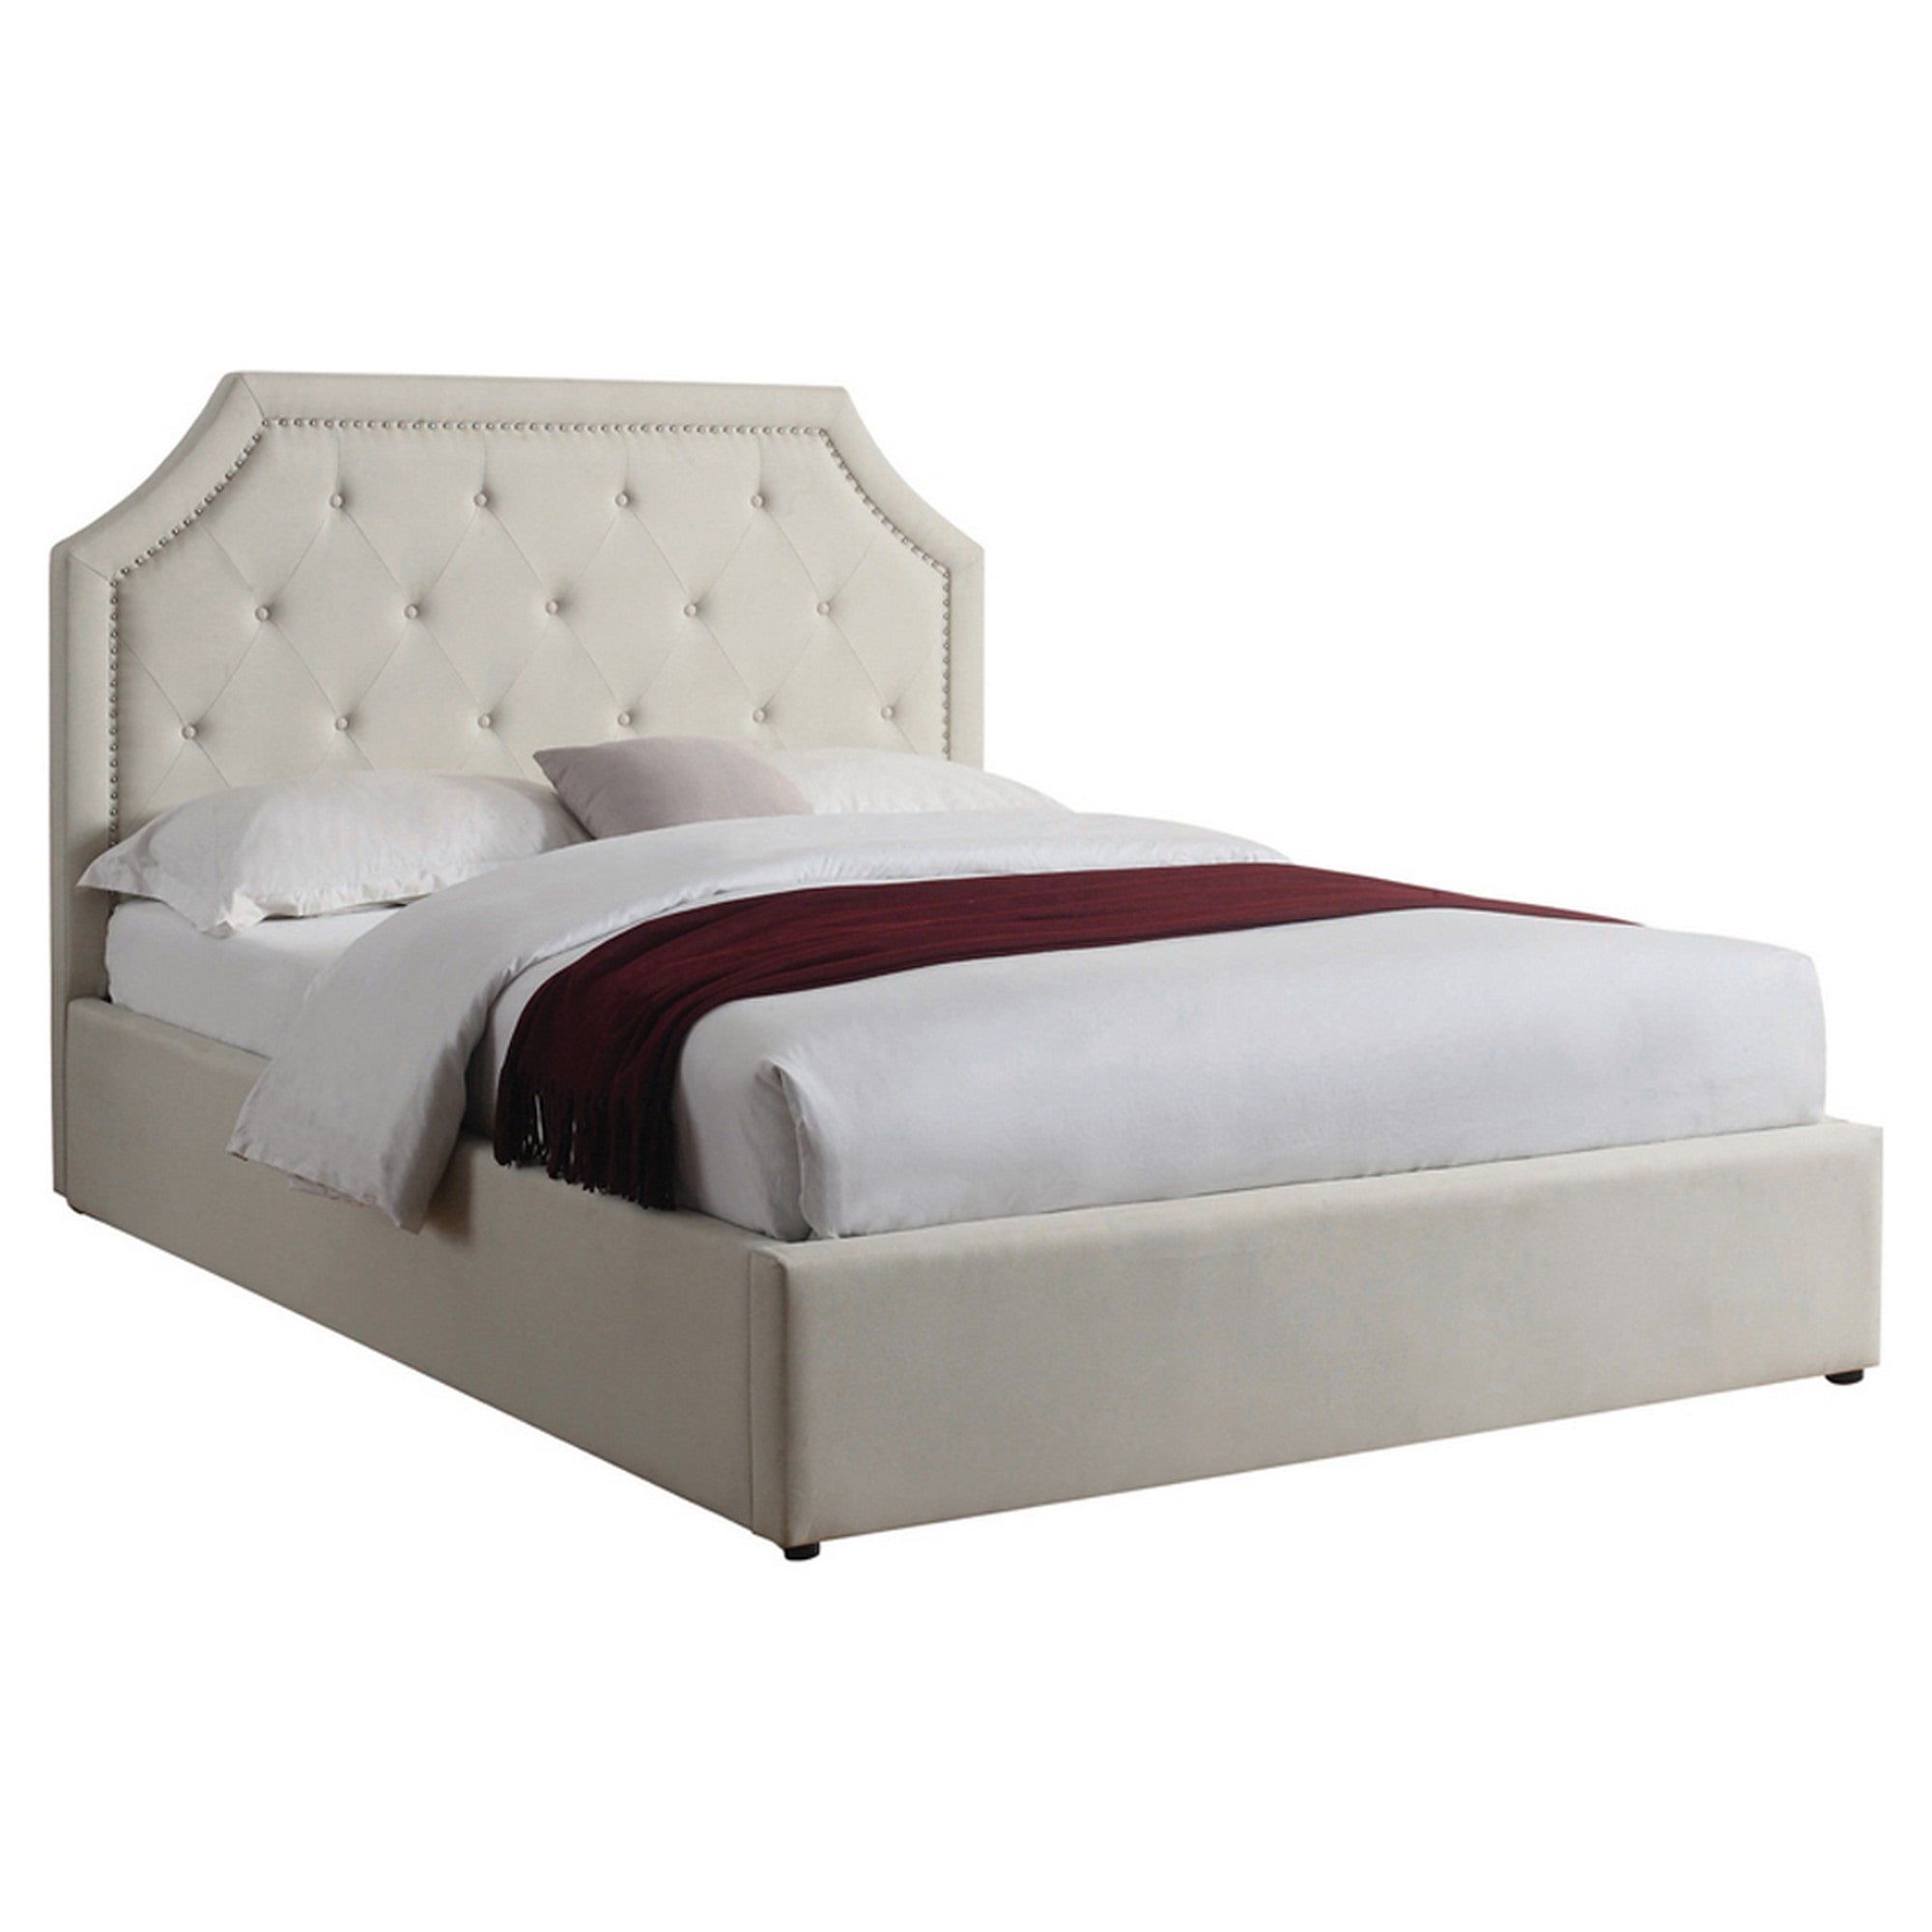 Storage Bed With Scooped Headboard, Hydraulic Lift Storage Bed King Kit